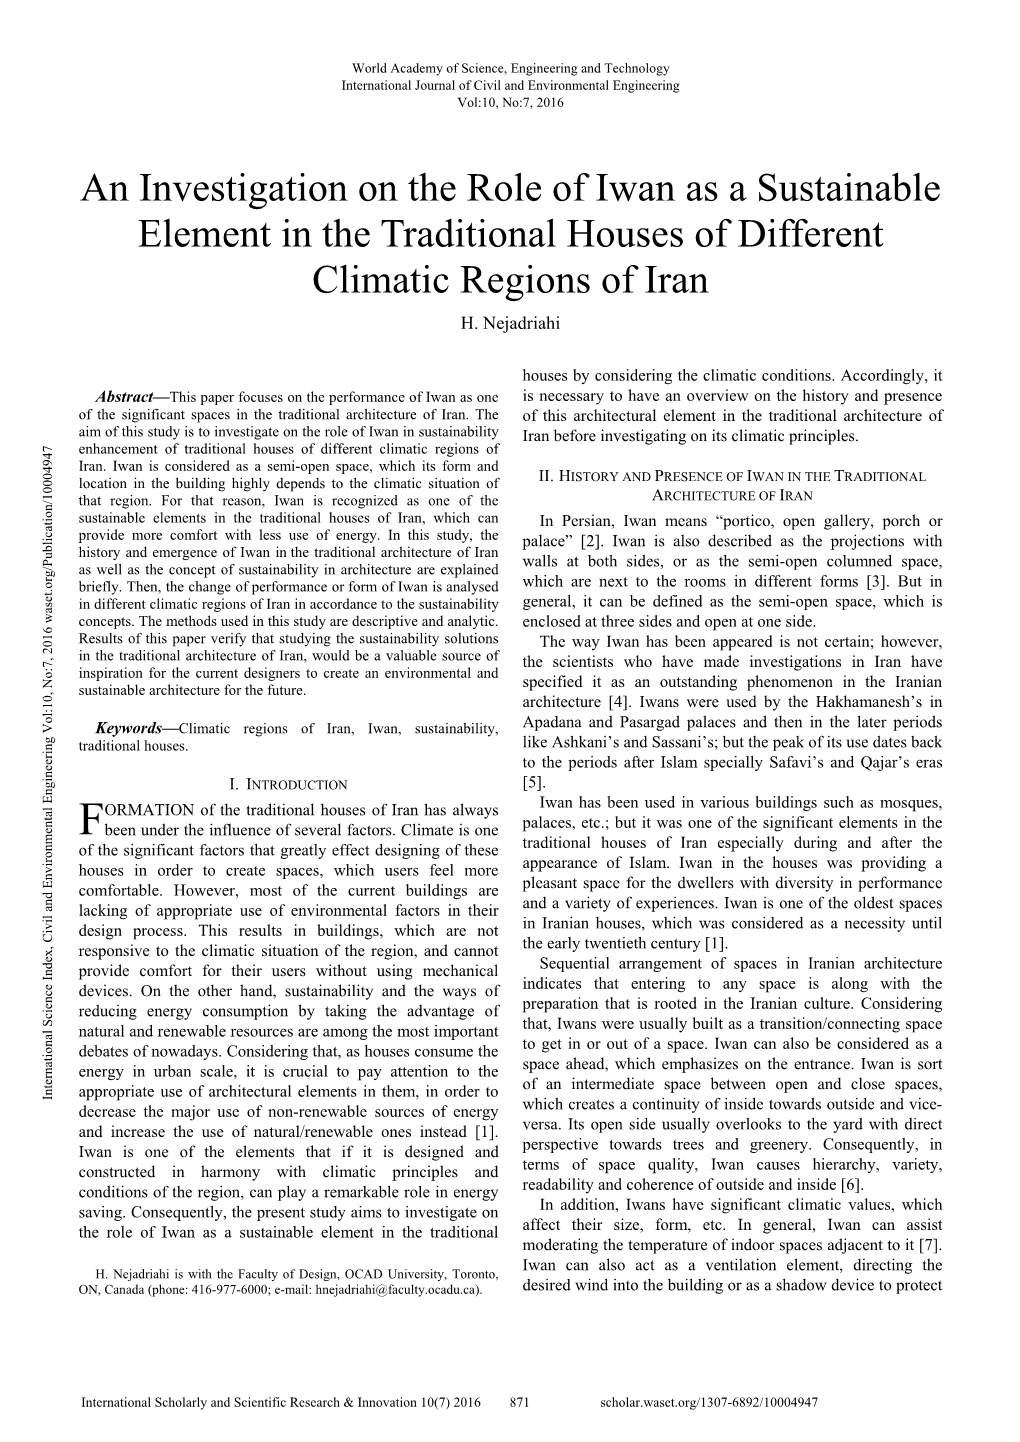 An Investigation on the Role of Iwan As a Sustainable Element in the Traditional Houses of Different Climatic Regions of Iran H